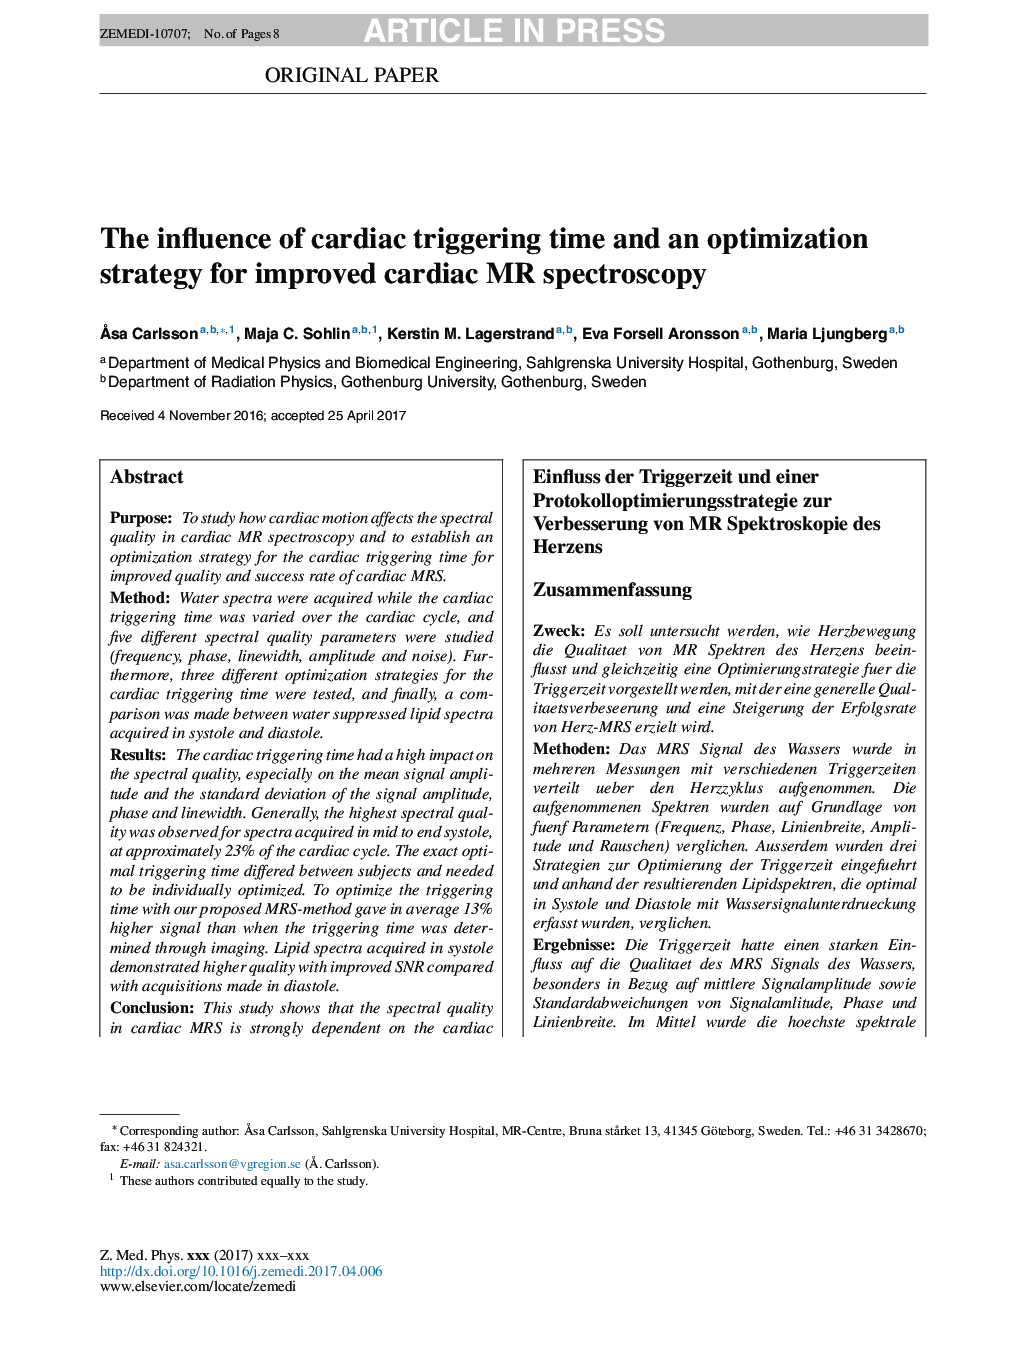 The influence of cardiac triggering time and an optimization strategy for improved cardiac MR spectroscopy